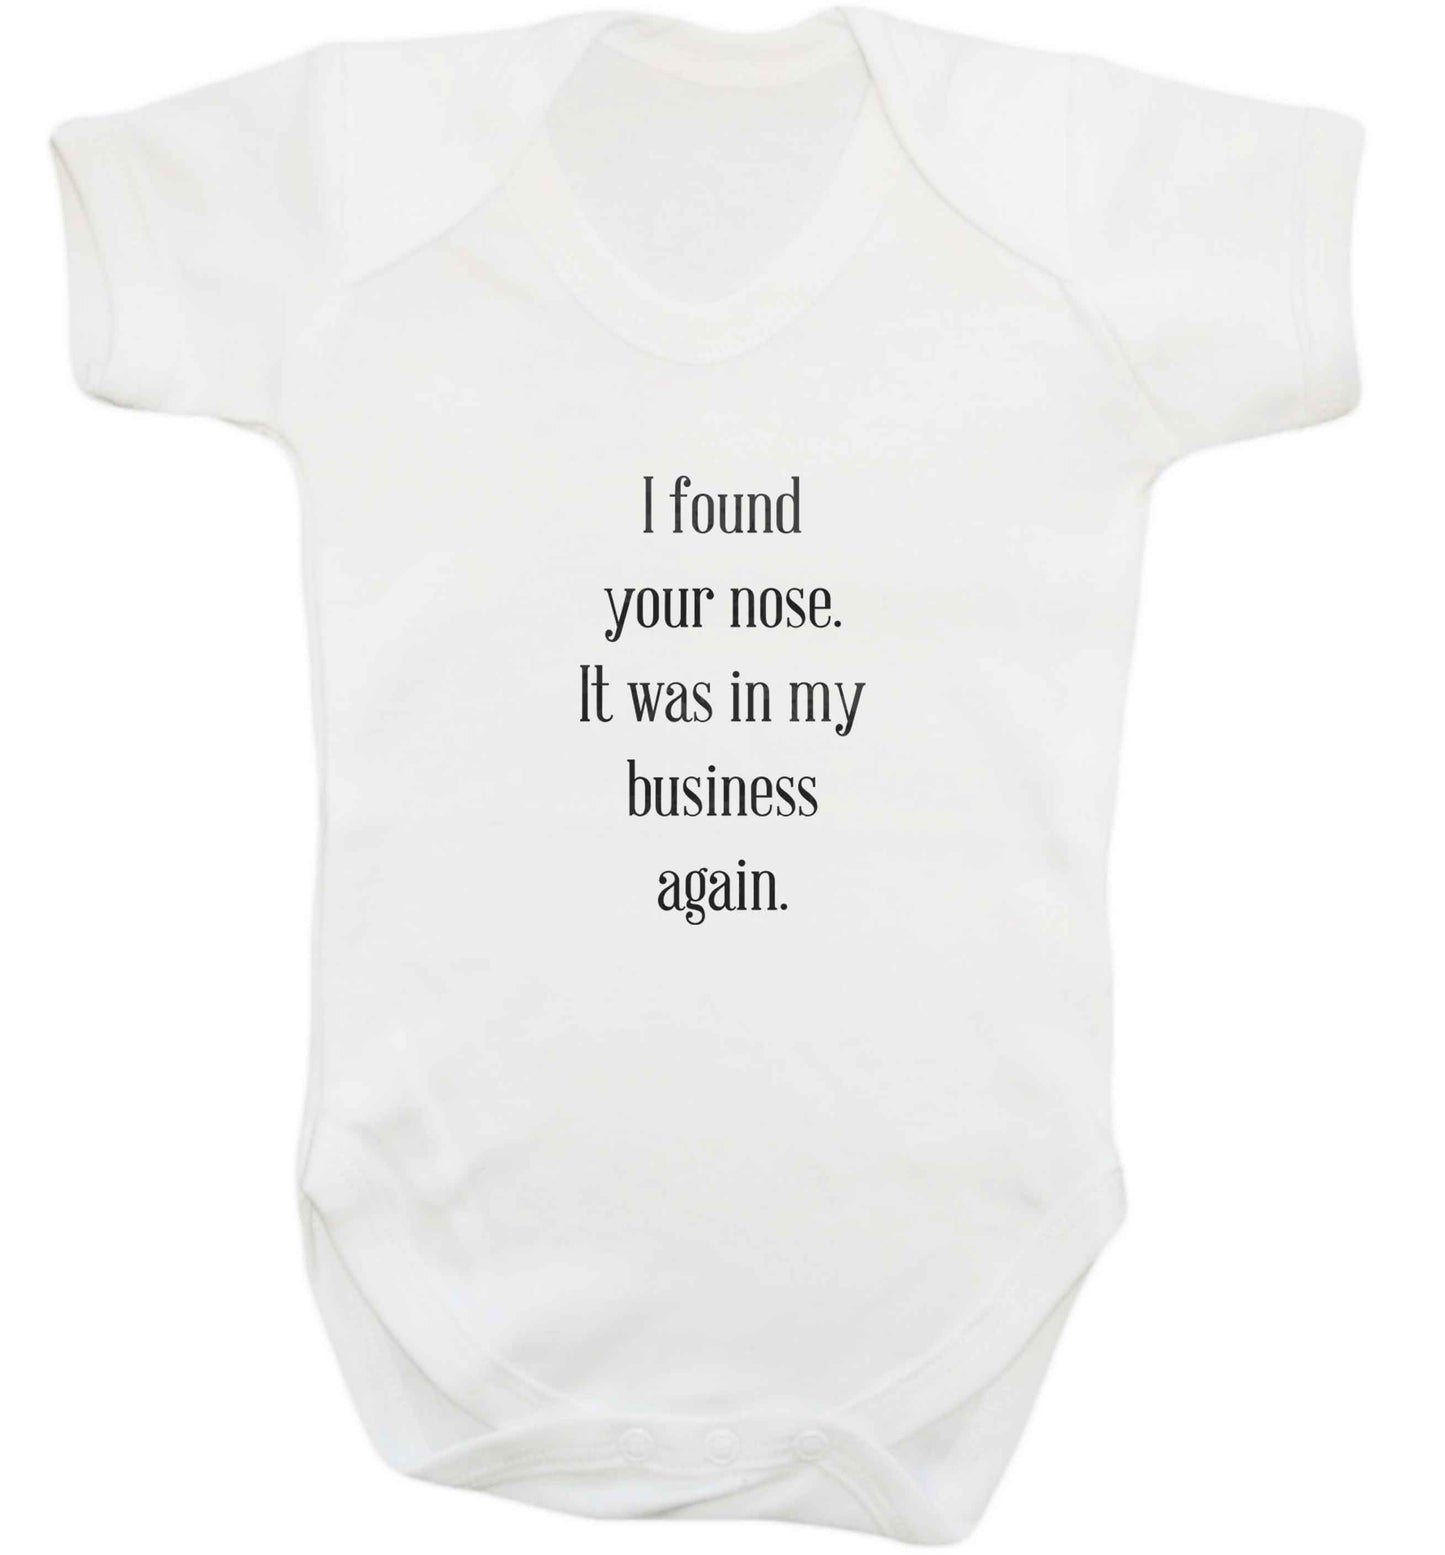 I found your nose it was in my business again baby vest white 18-24 months